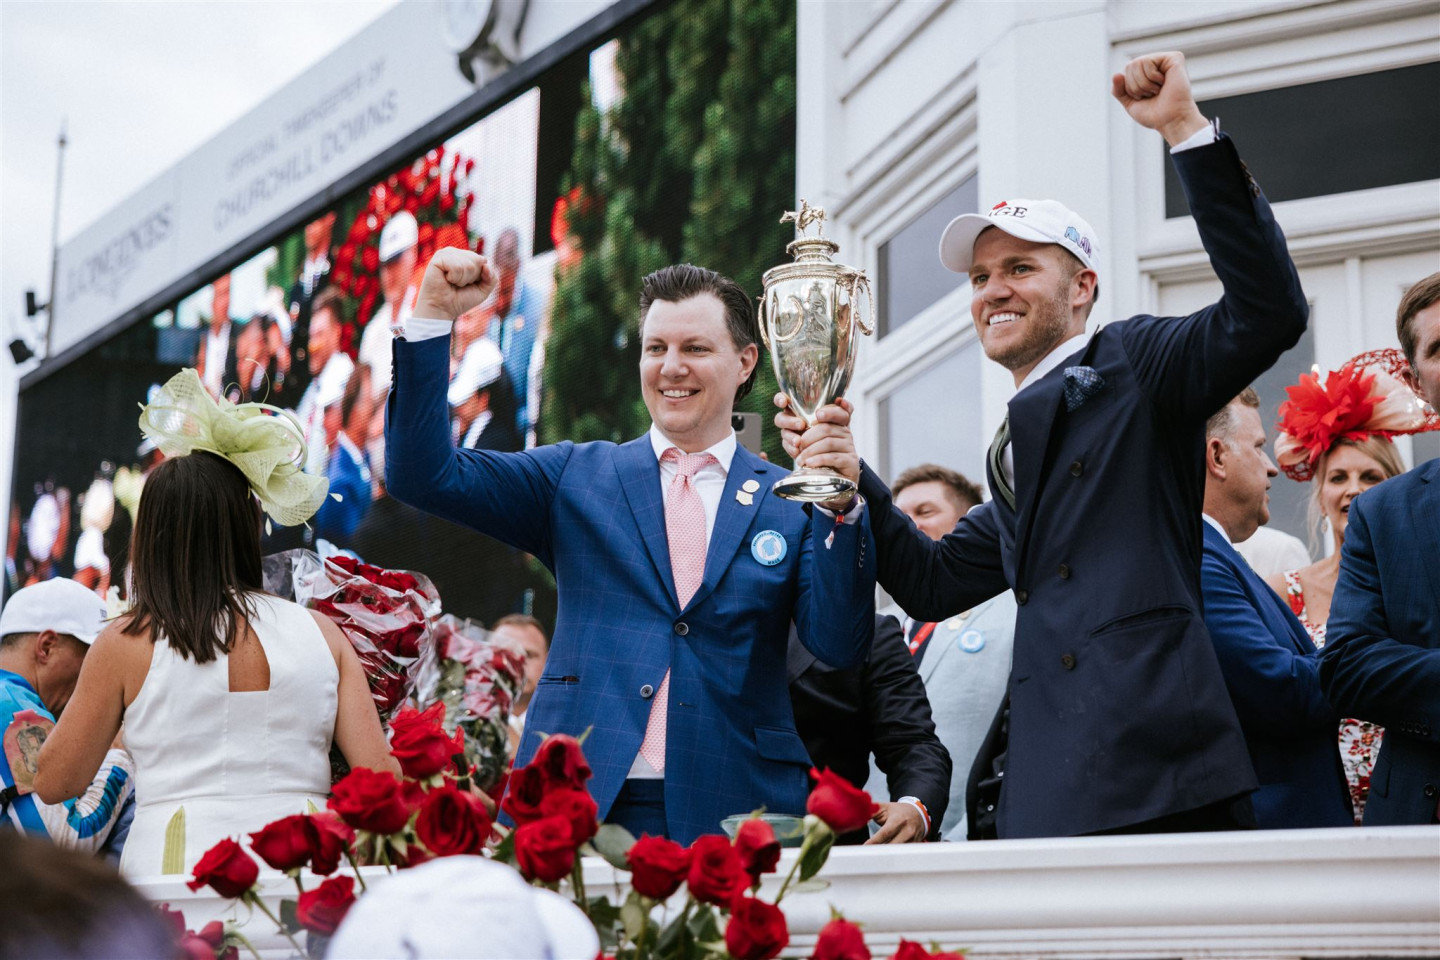 Brian Doxtator and Chase Chamberlin hold a golden trophy together while raising their fists into the air after the Kentucky Derby.